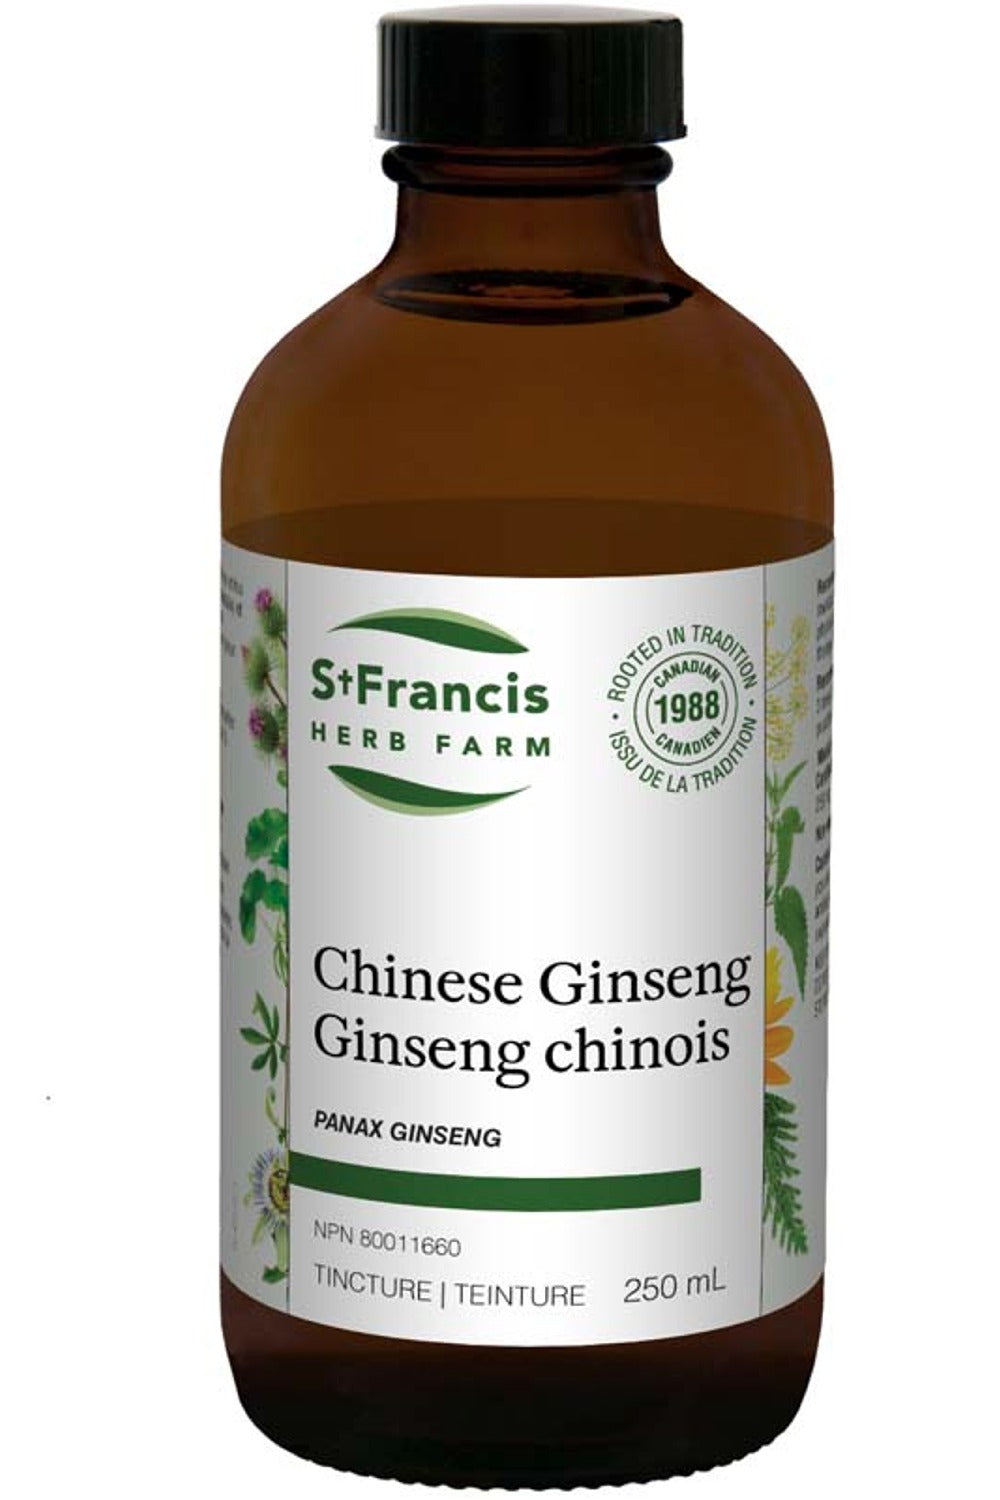 ST FRANCIS HERB FARM Chinese Ginseng (250 ml)